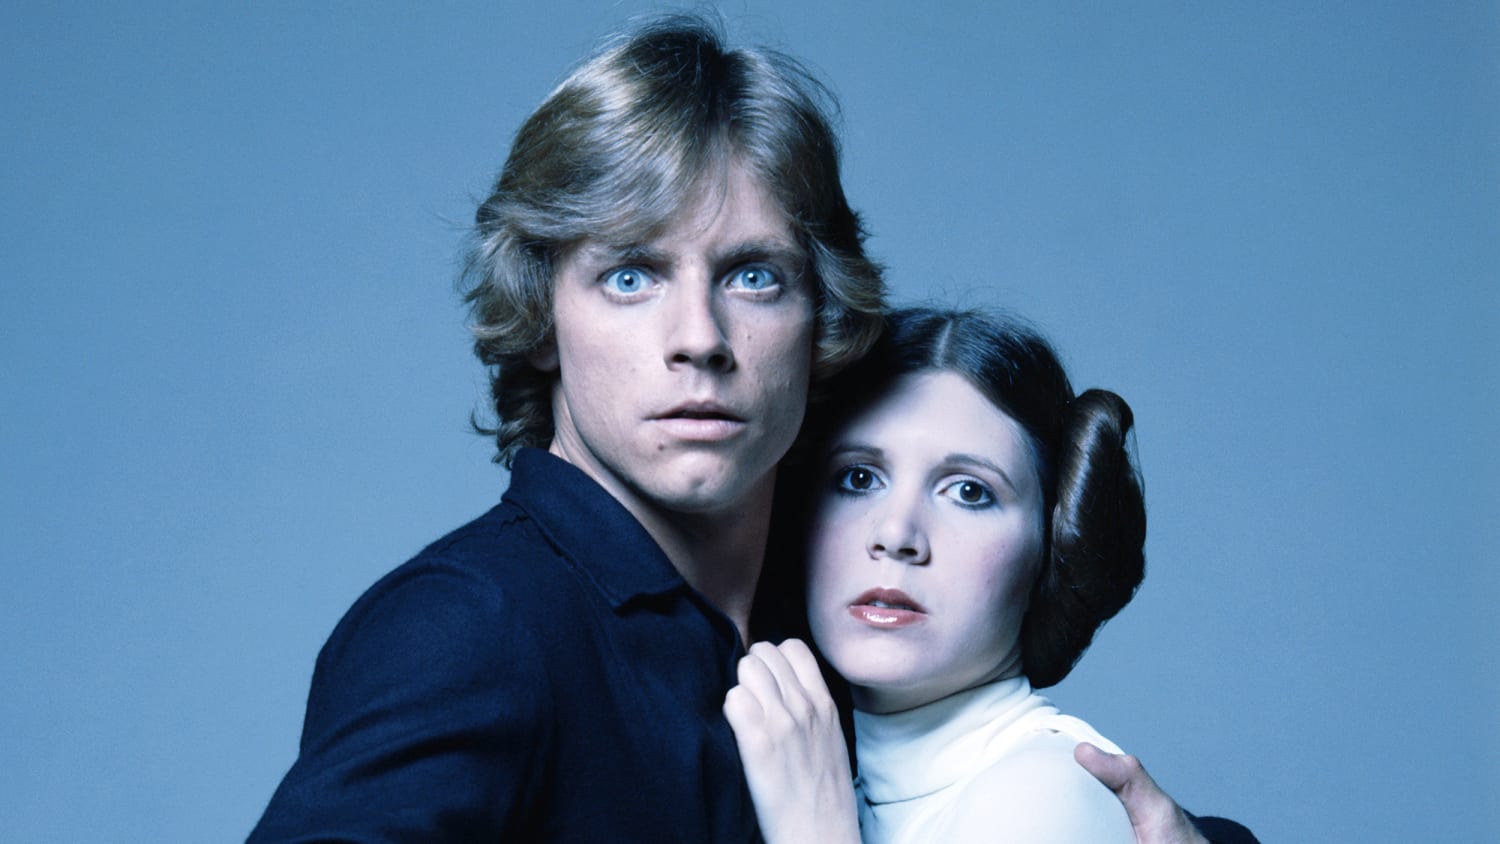 Mark Hamill on losing 'space-twin' Carrie Fisher: 'She was OUR princess'